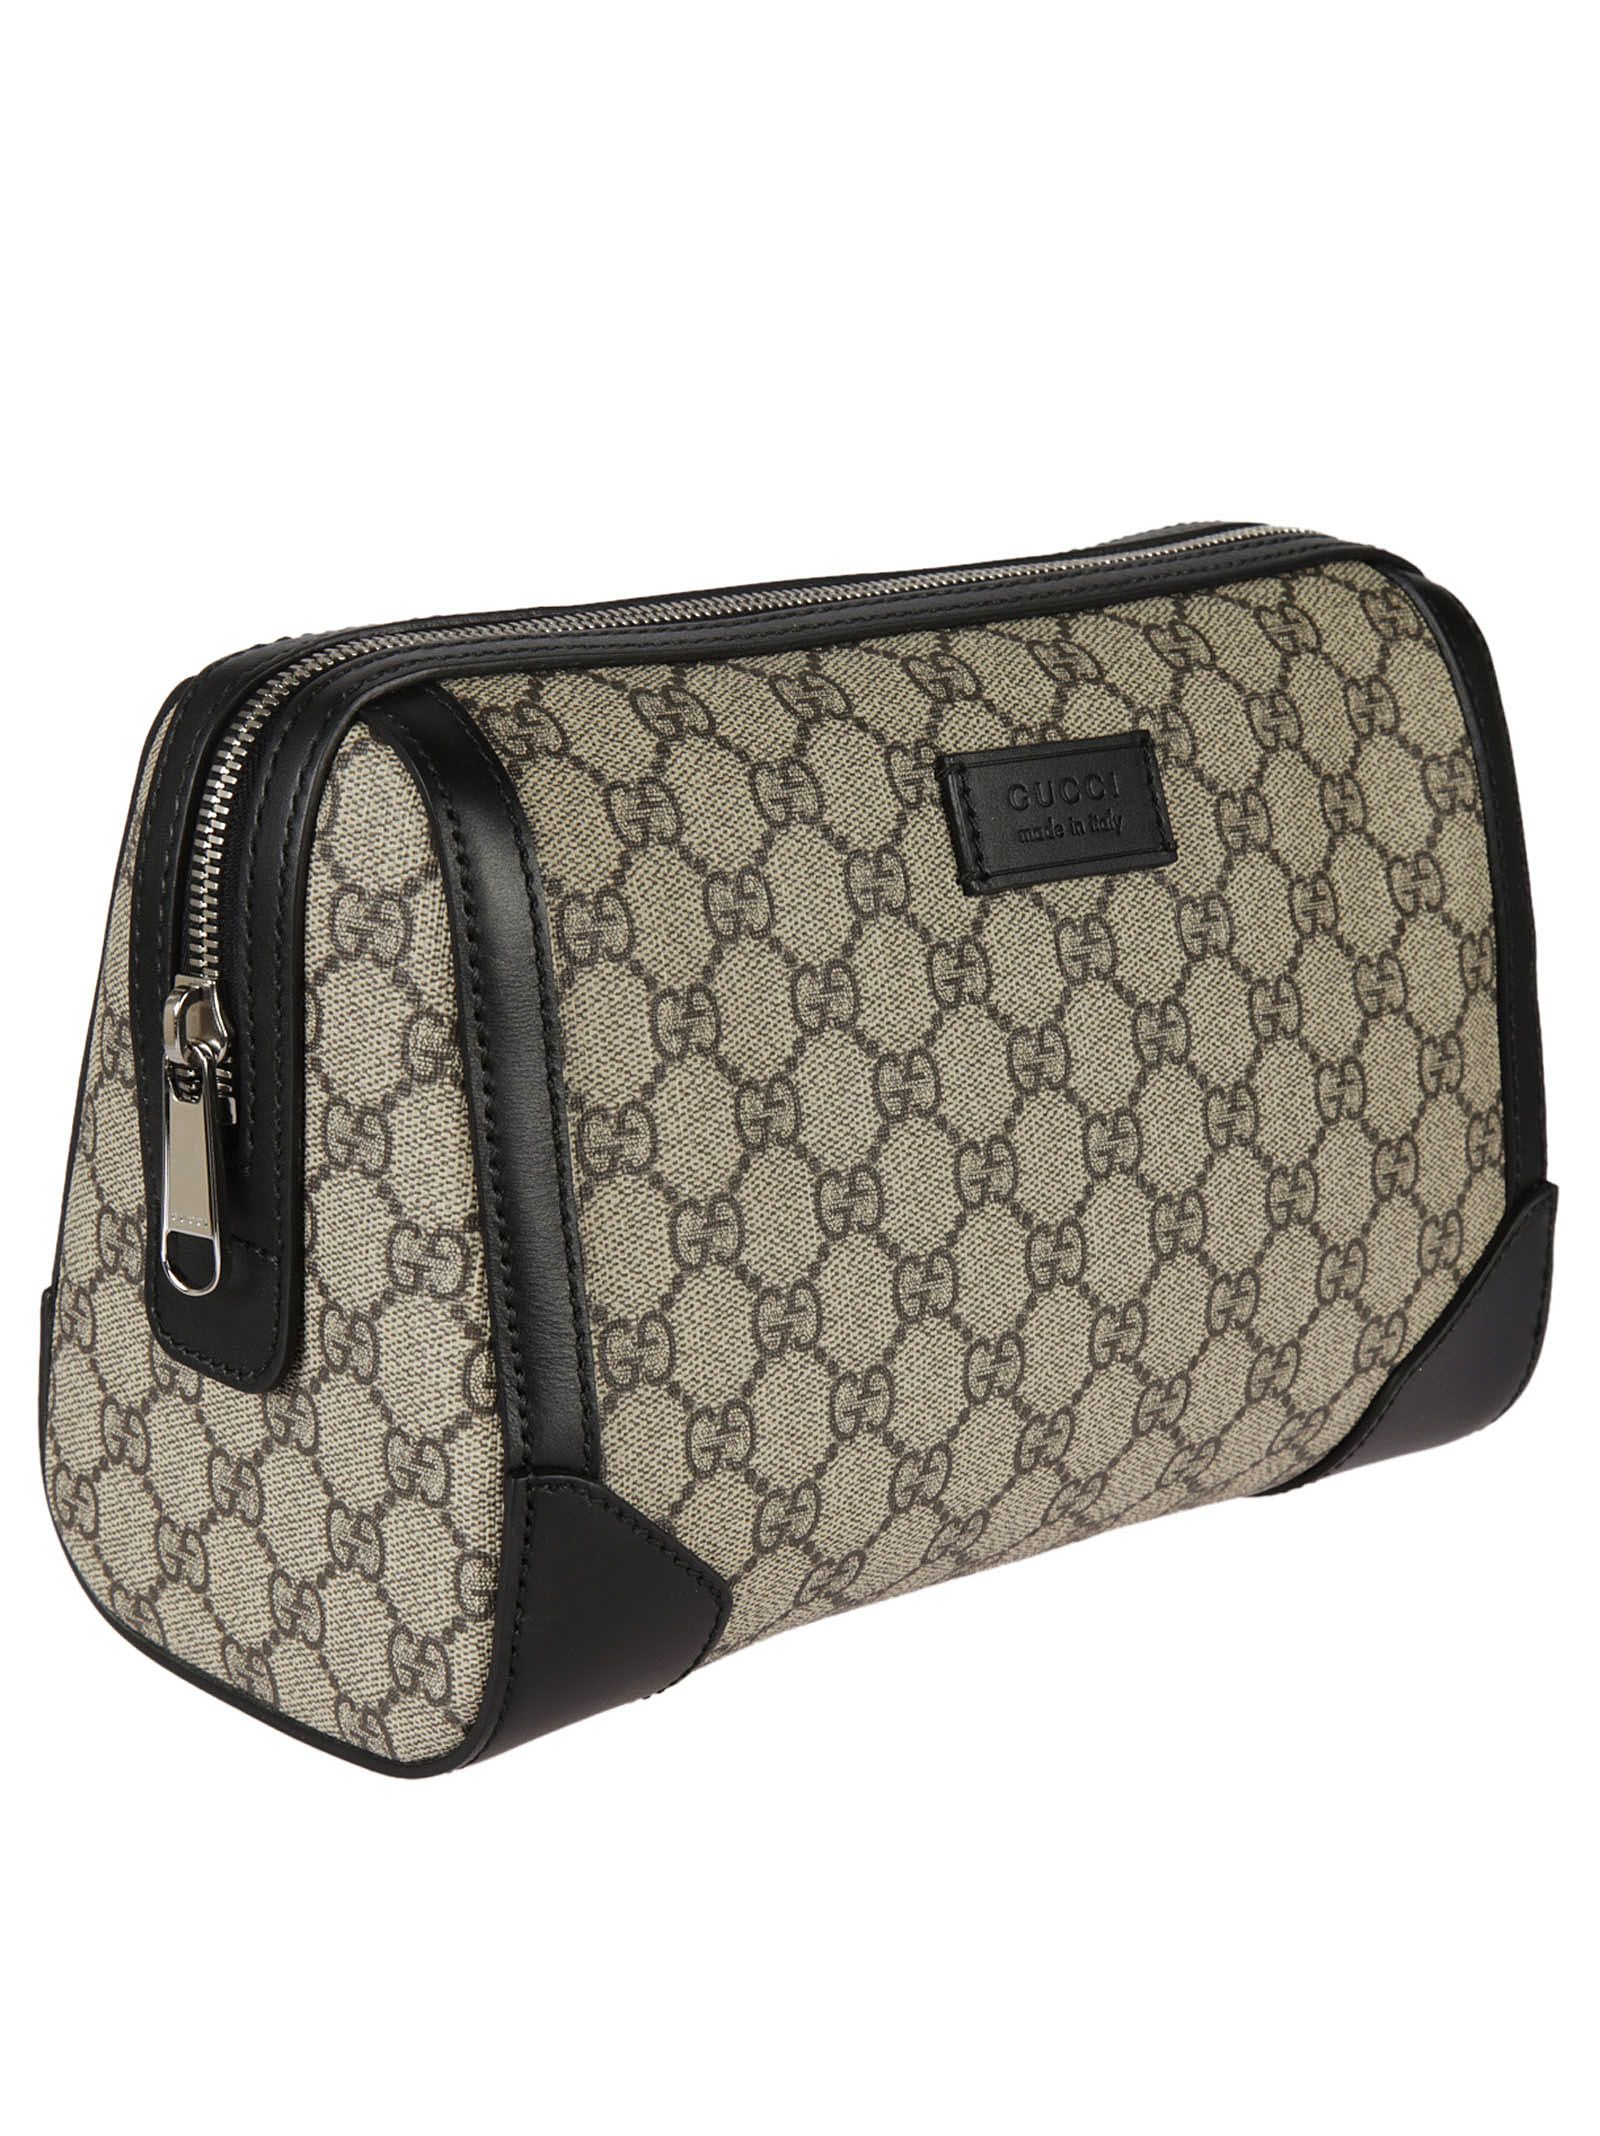 italist | Best price in the market for Gucci Gucci GG Supreme Toiletry Tote - Brown - 9496884 ...